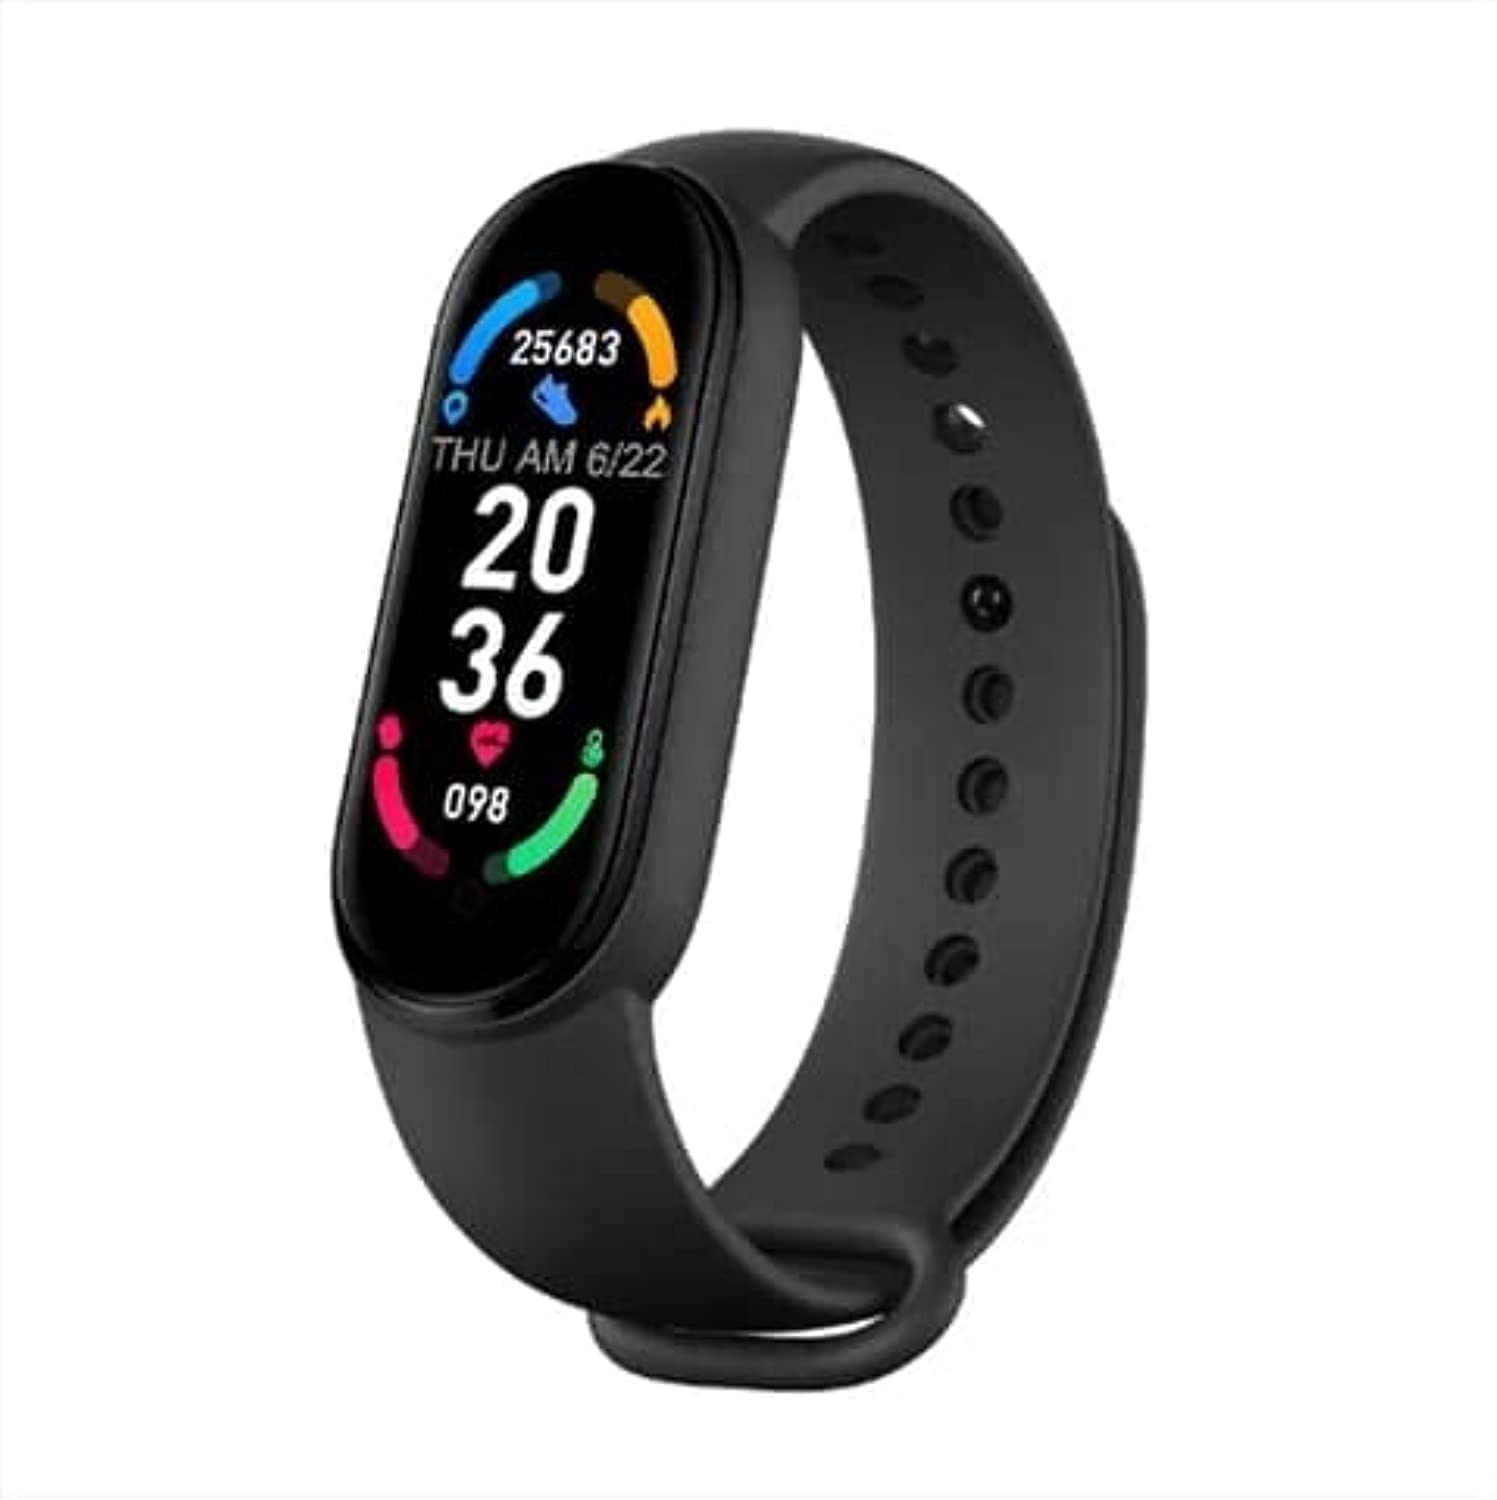 sadaf shaheen M6 Heart Monitor Rate 1.1in Color Screen with Waterproof Fitness Tracker Bluetooth 4.0 Conection Global Version - Black